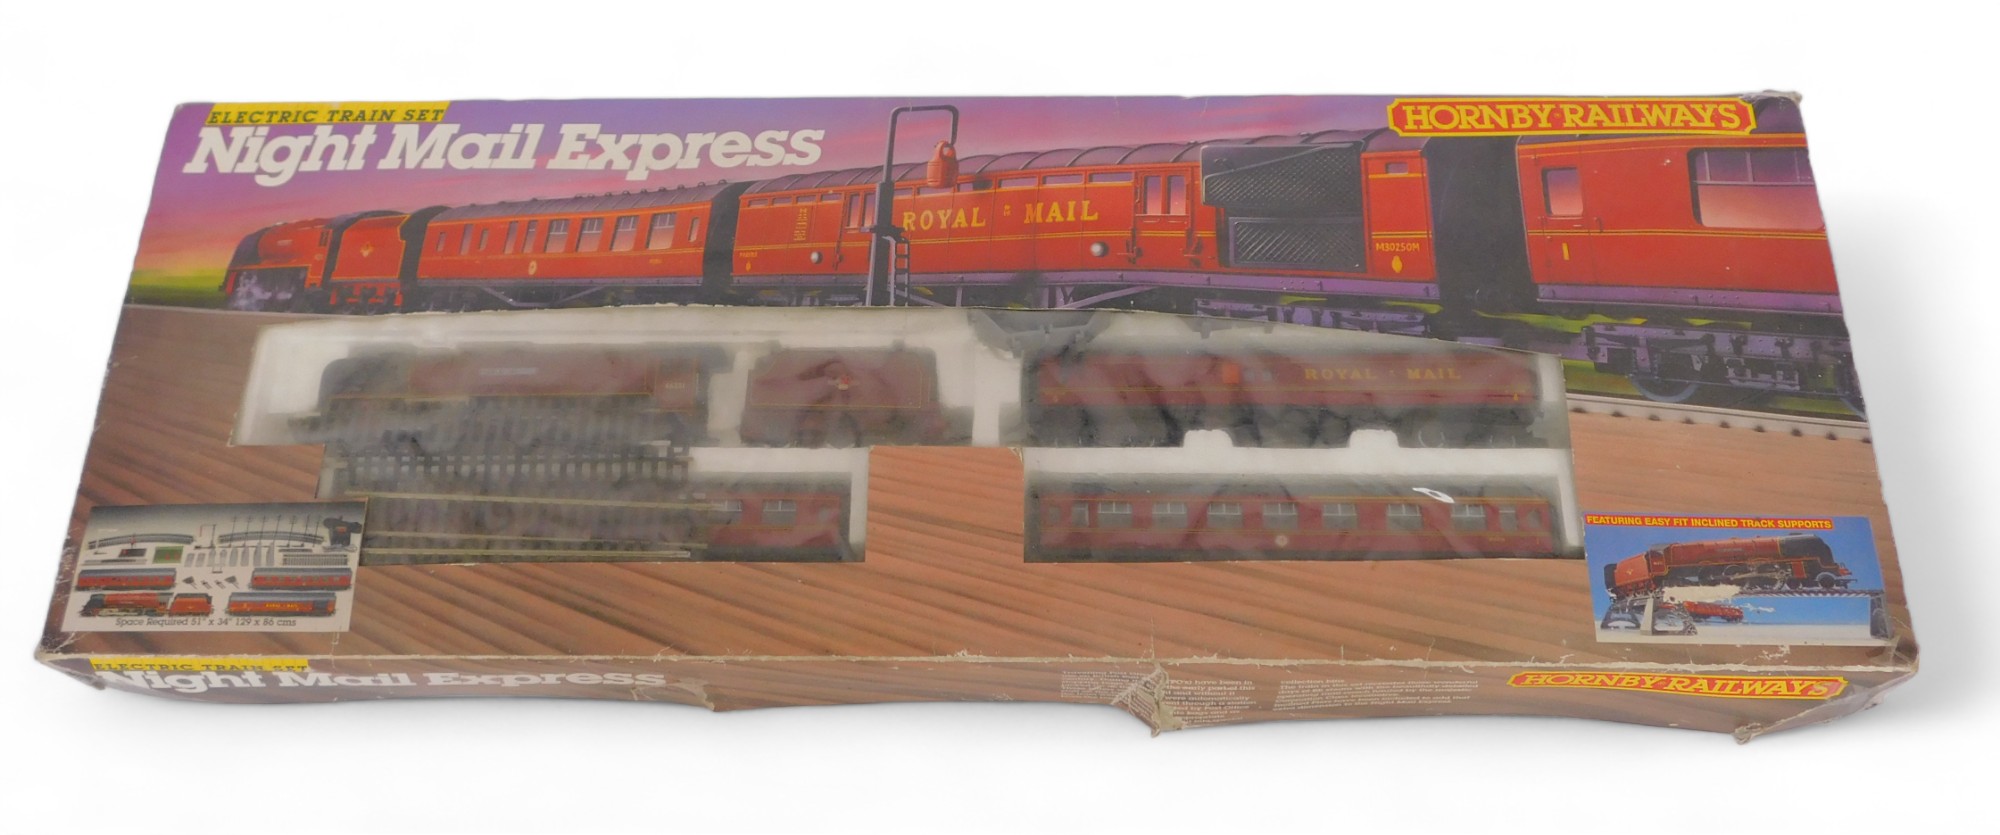 Hornby OO gauge train set R758 The Night Mail Express, boxed.